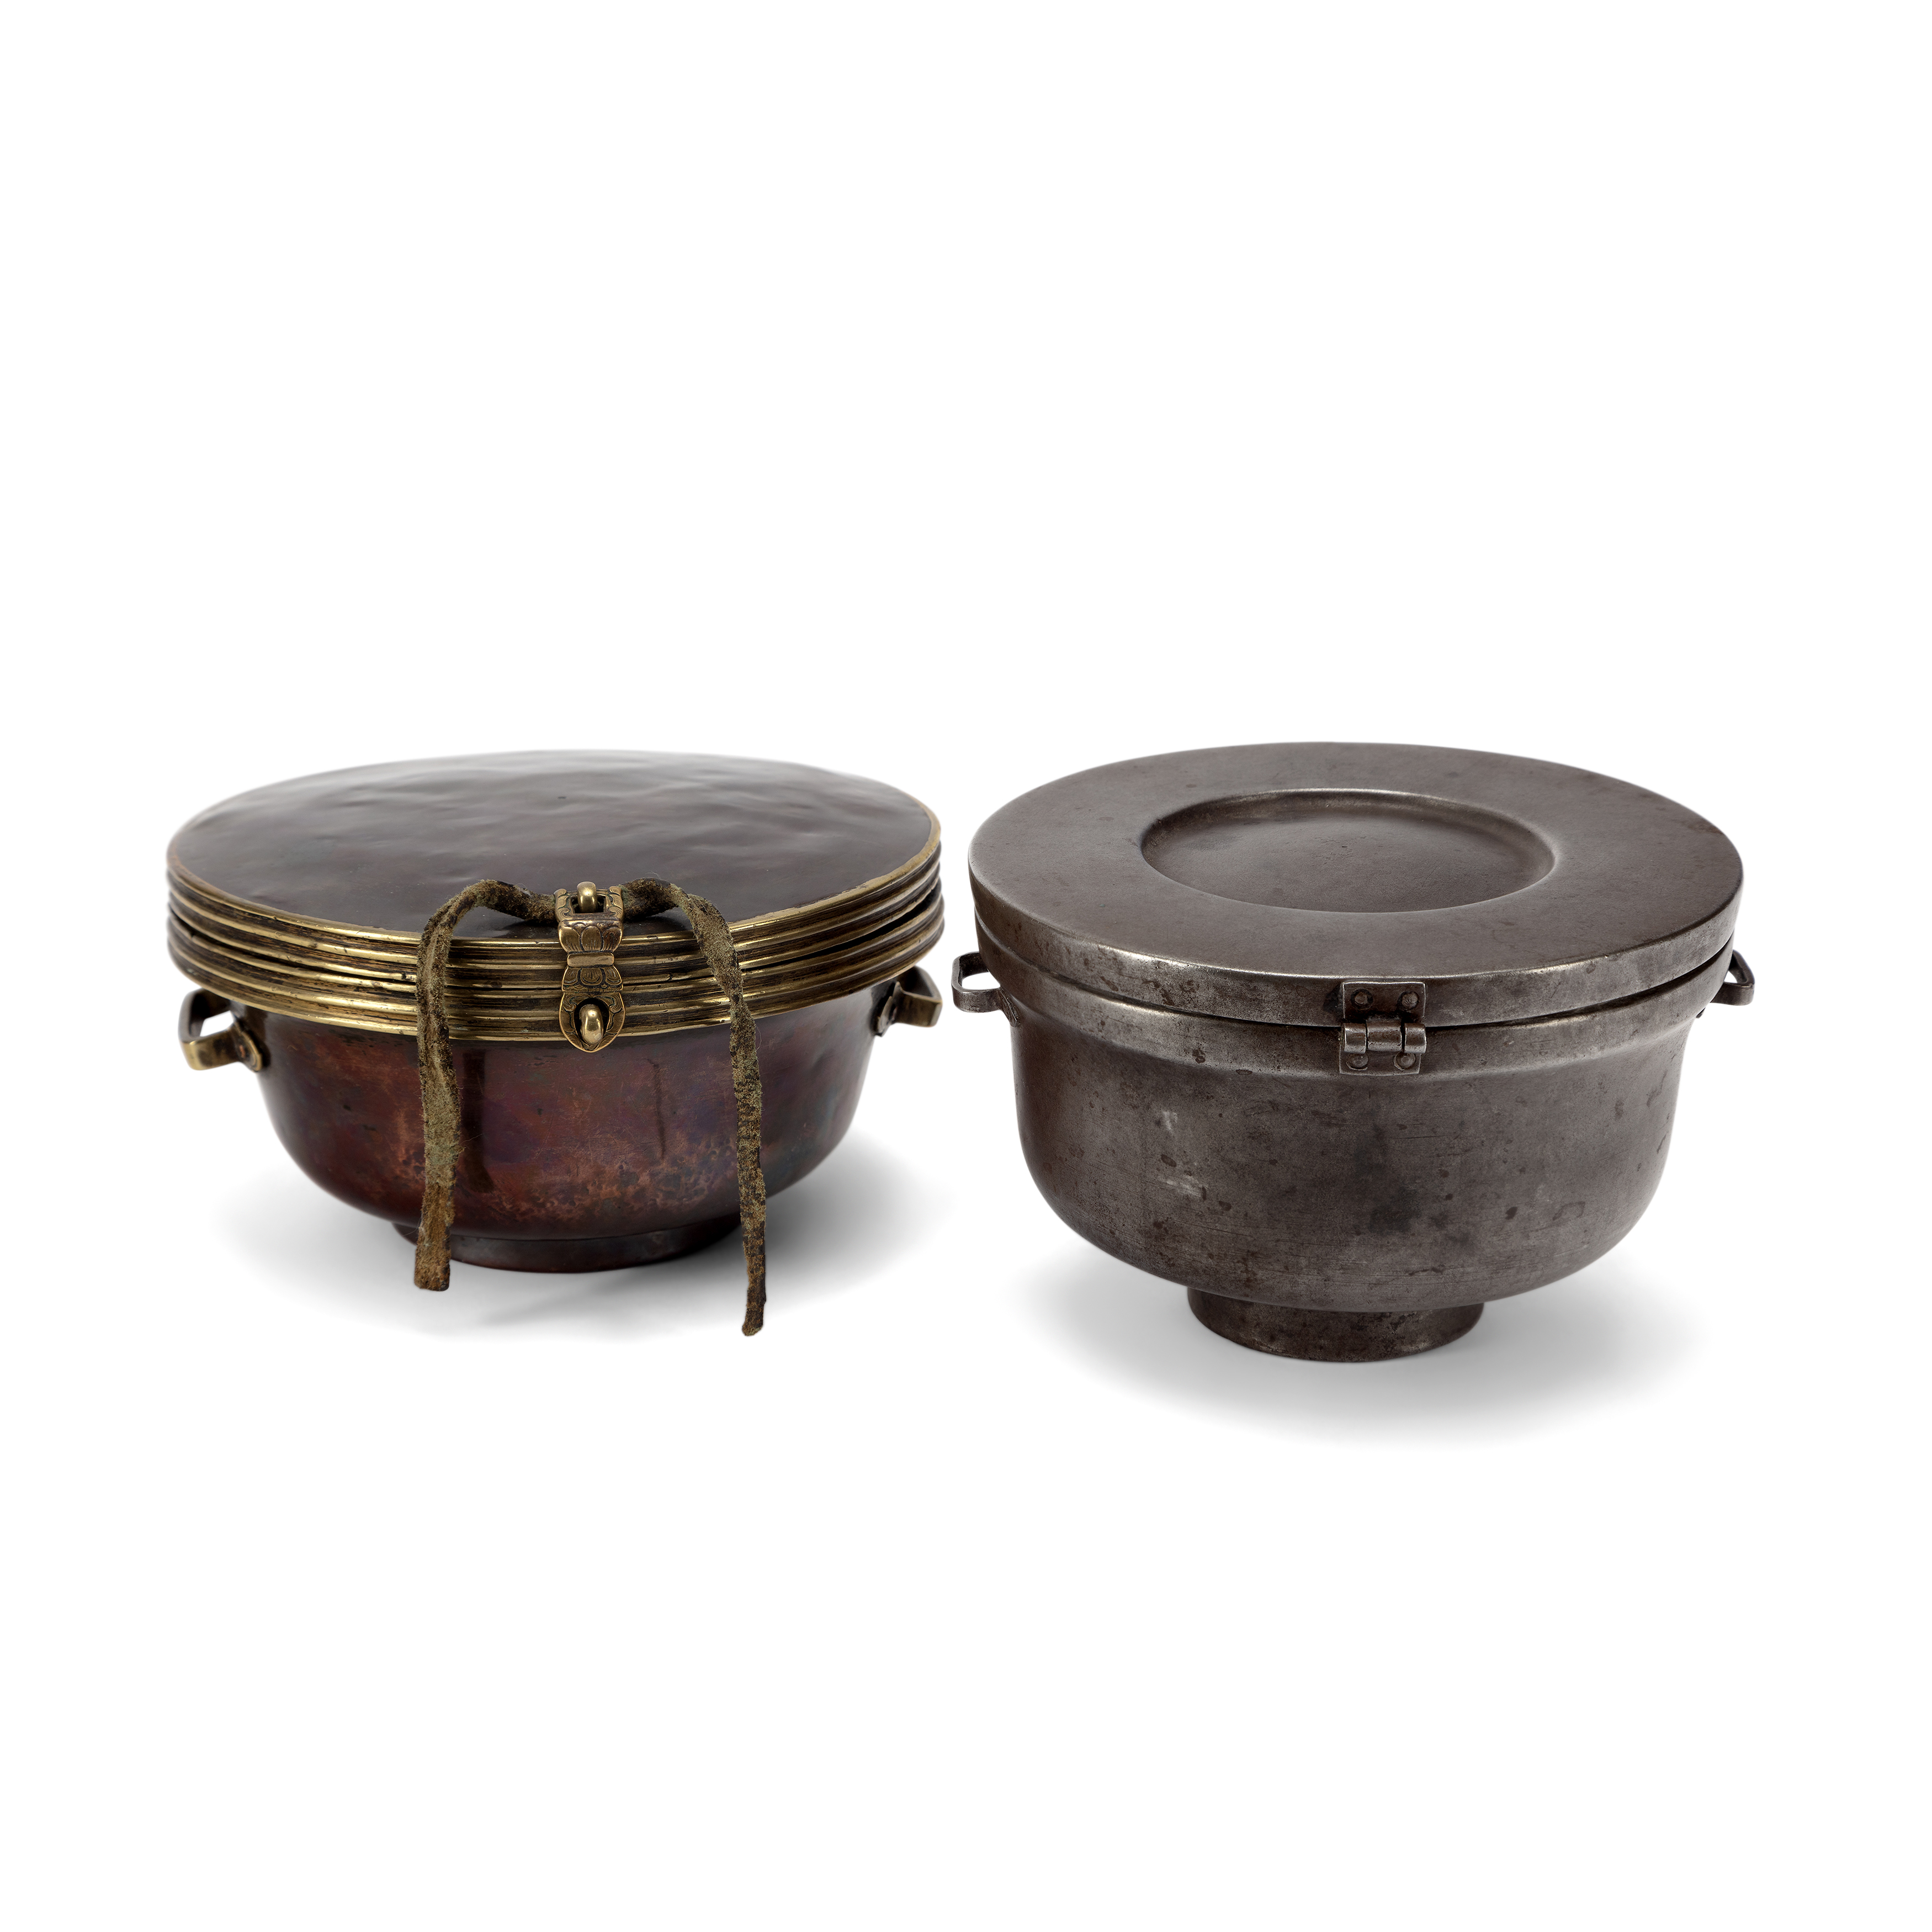 Two Tibetan copper alloy bowl cases 19th/20th century Comprising: a copper bowl case and hinged...